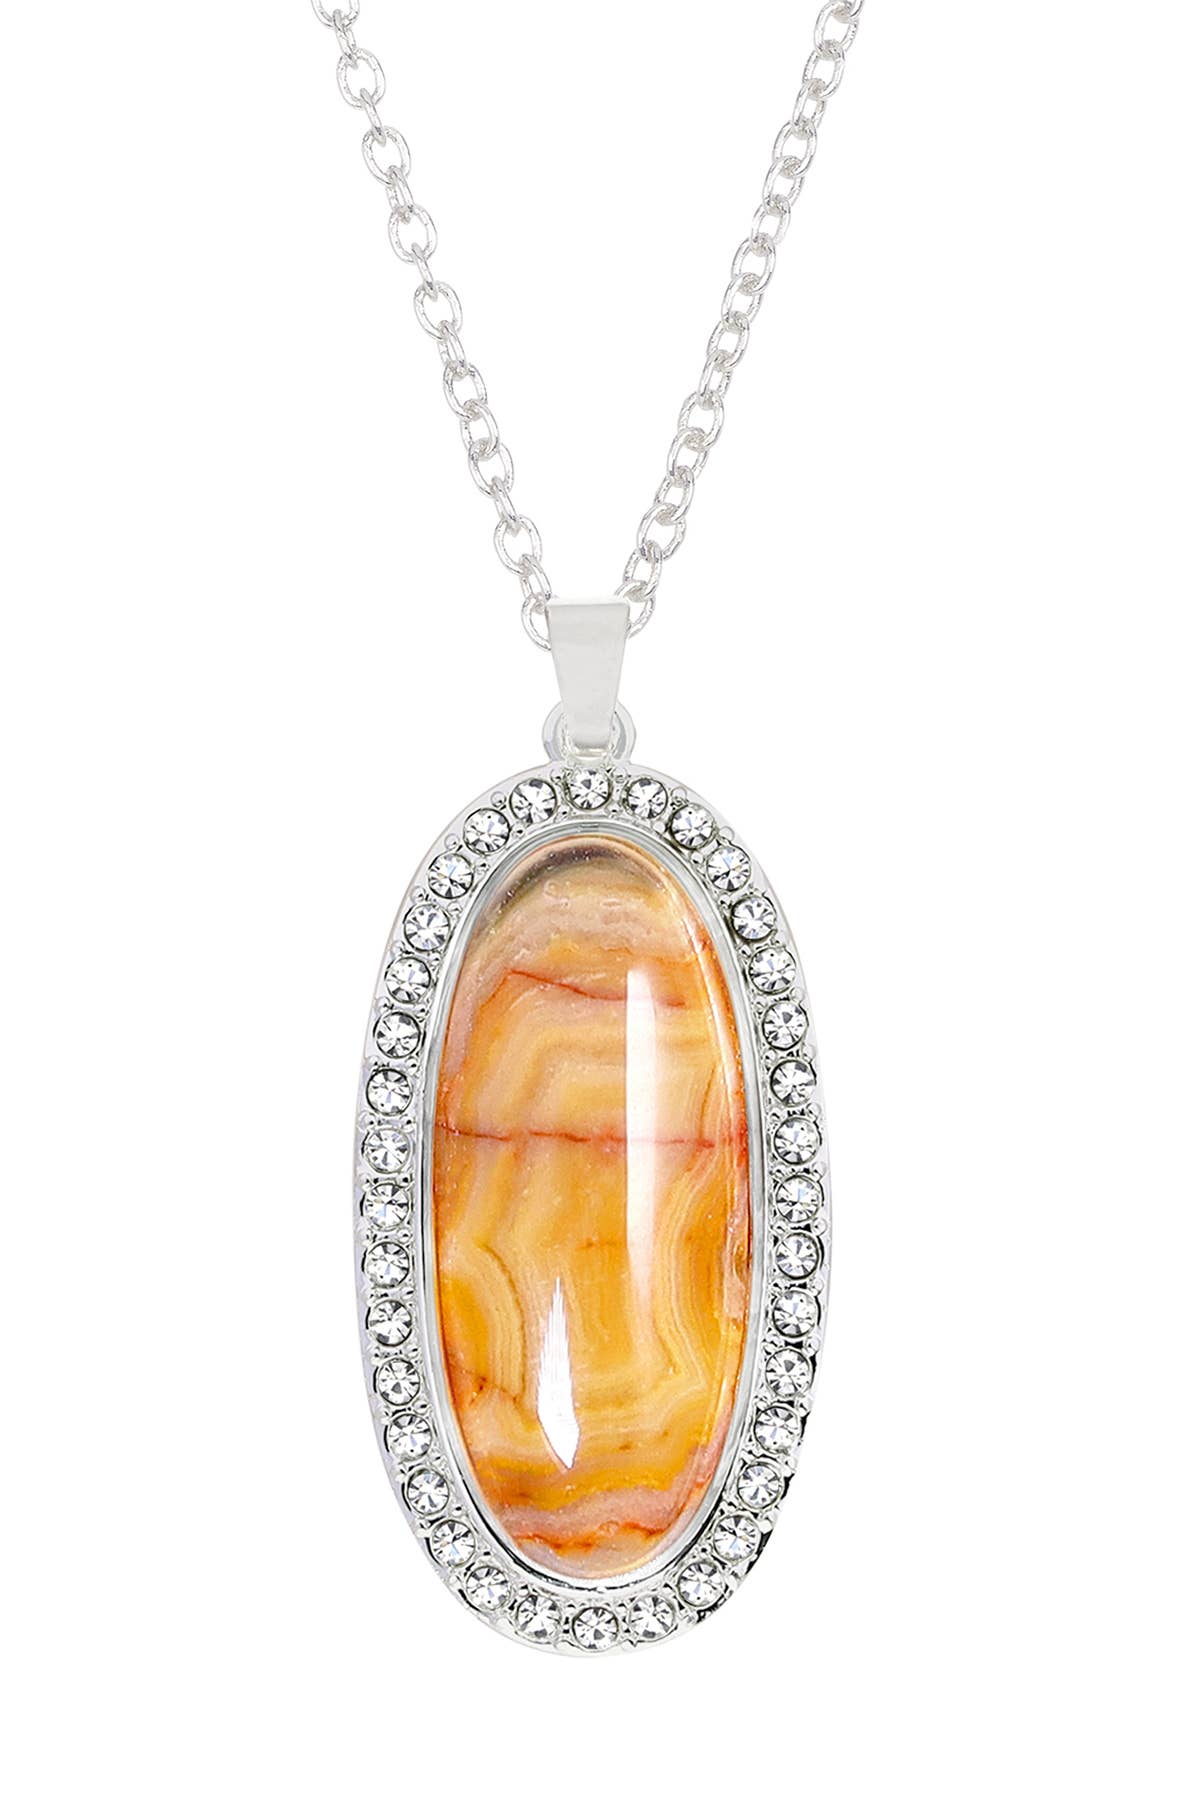 Sterling Silver & Crazy Lace Agate Pendant Necklace - SS